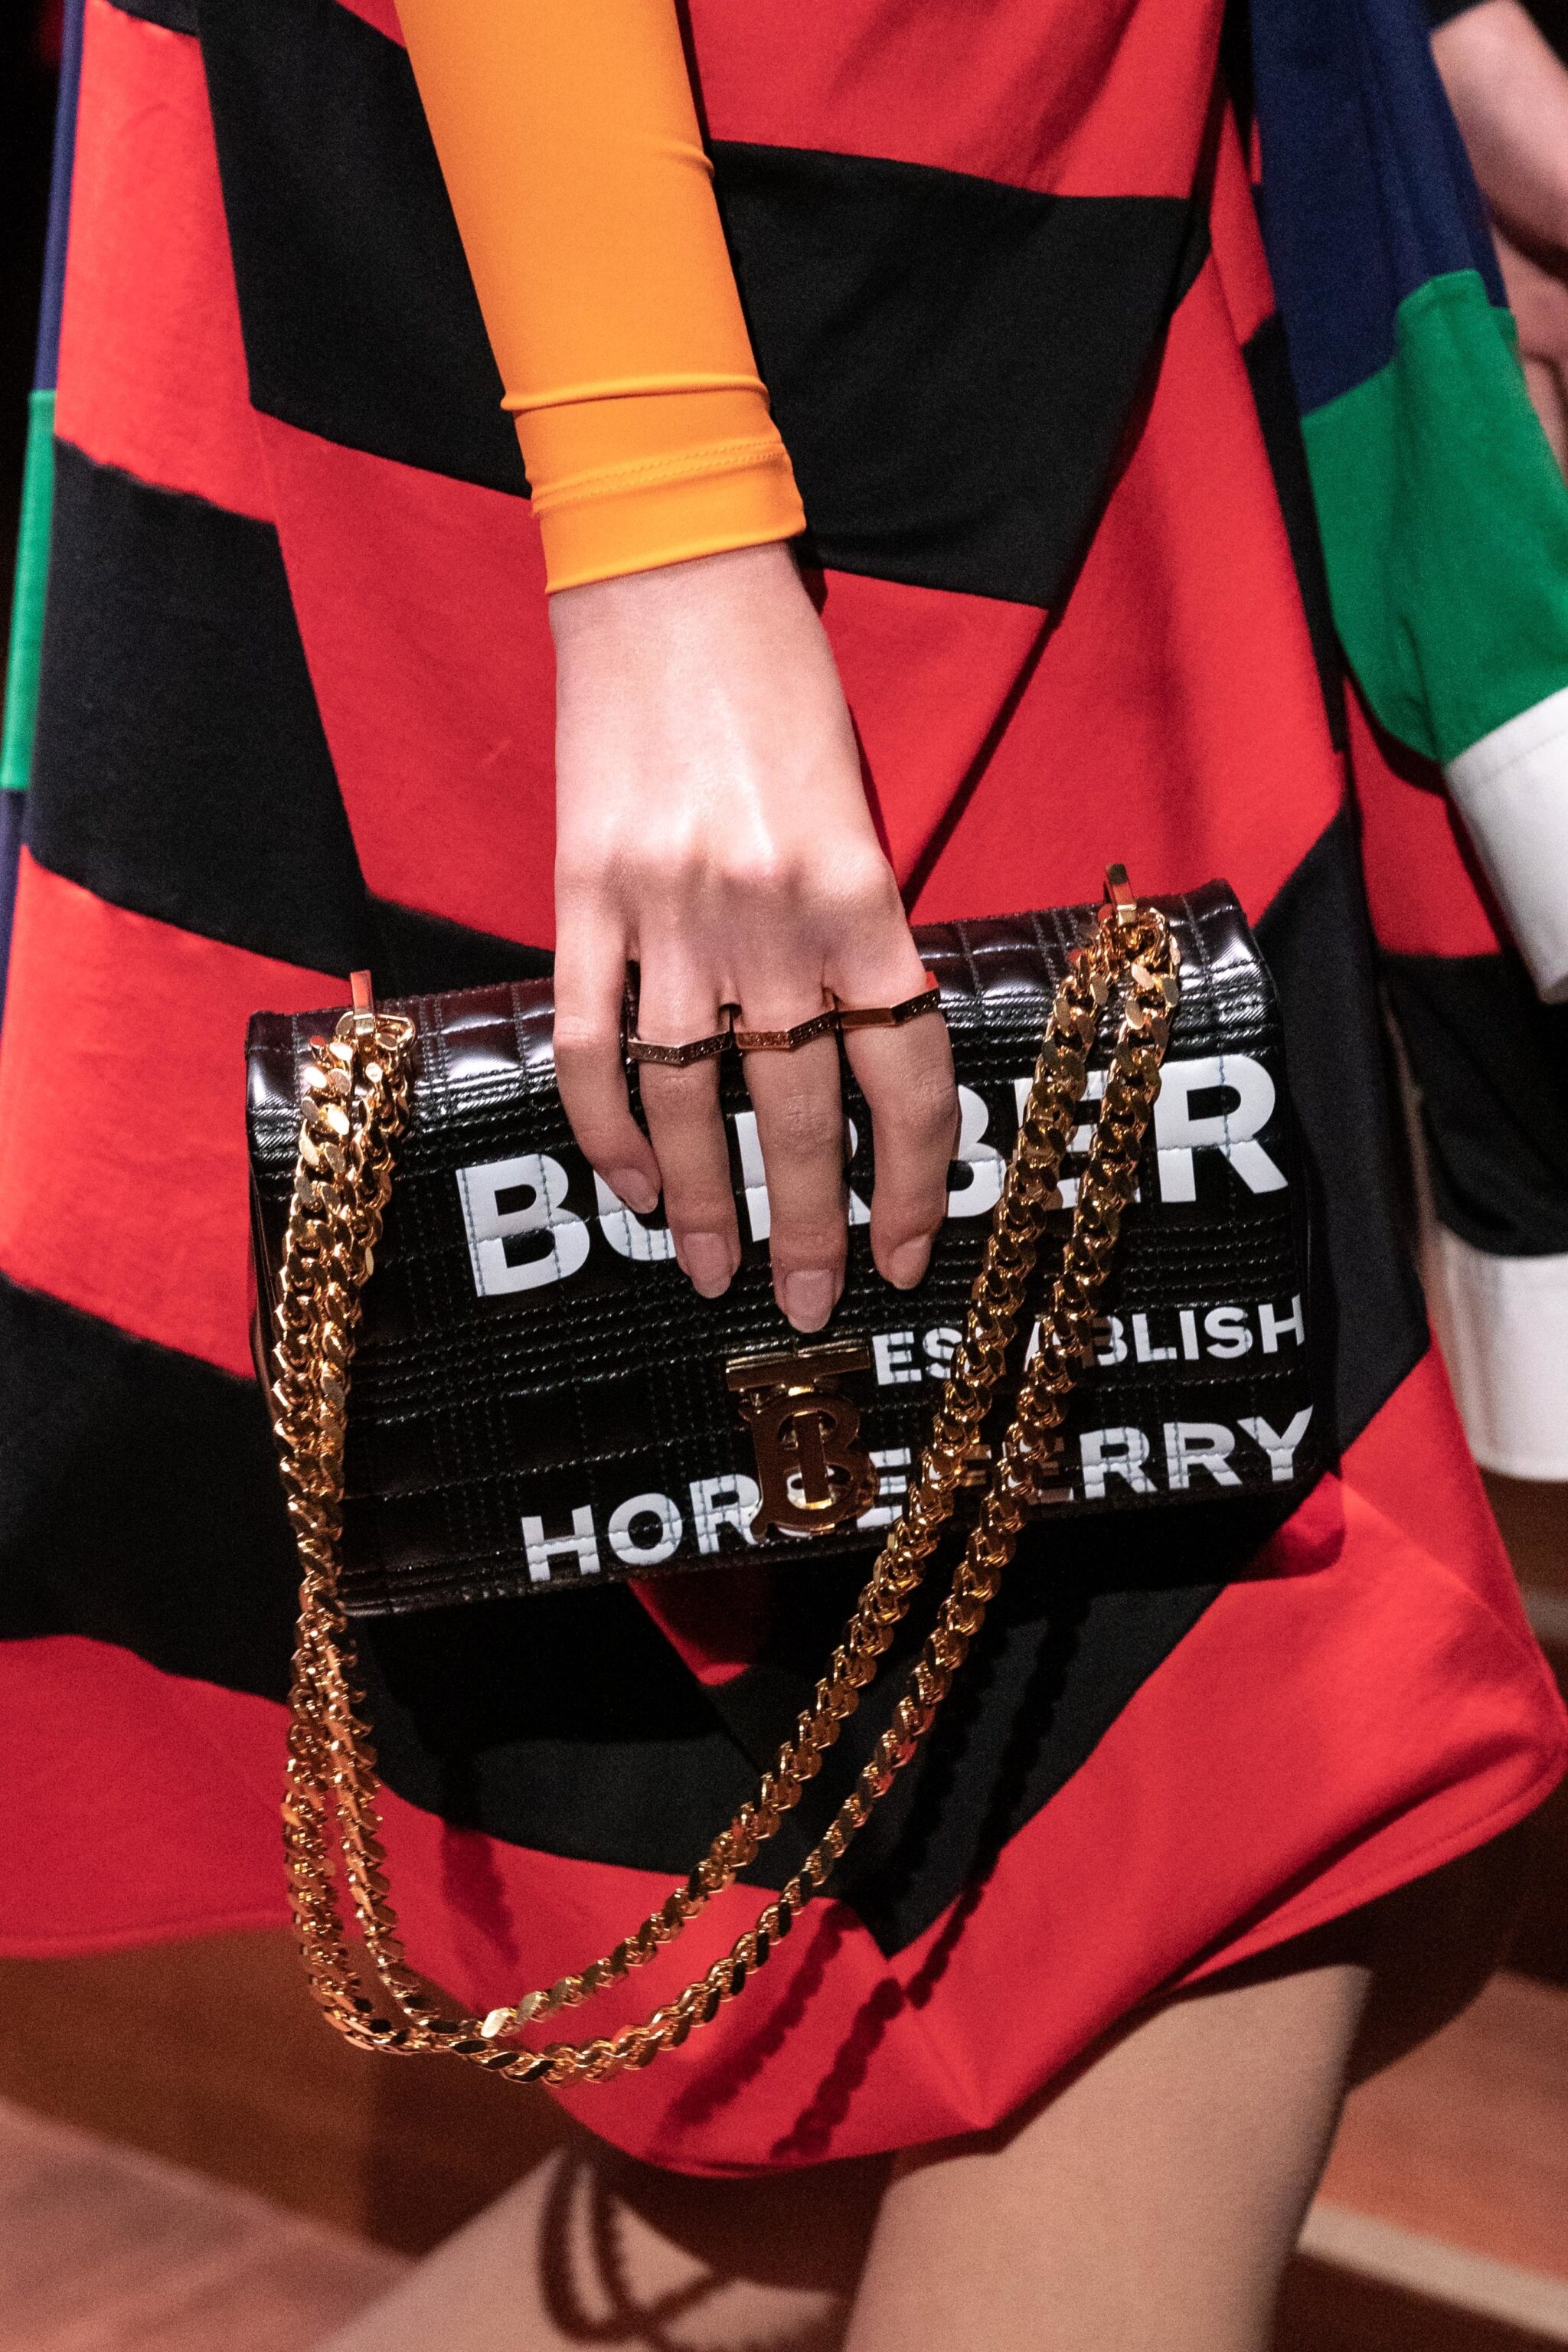 New Arrivals: BURBERRY Fall/Winter 2019 “Tempest Collection